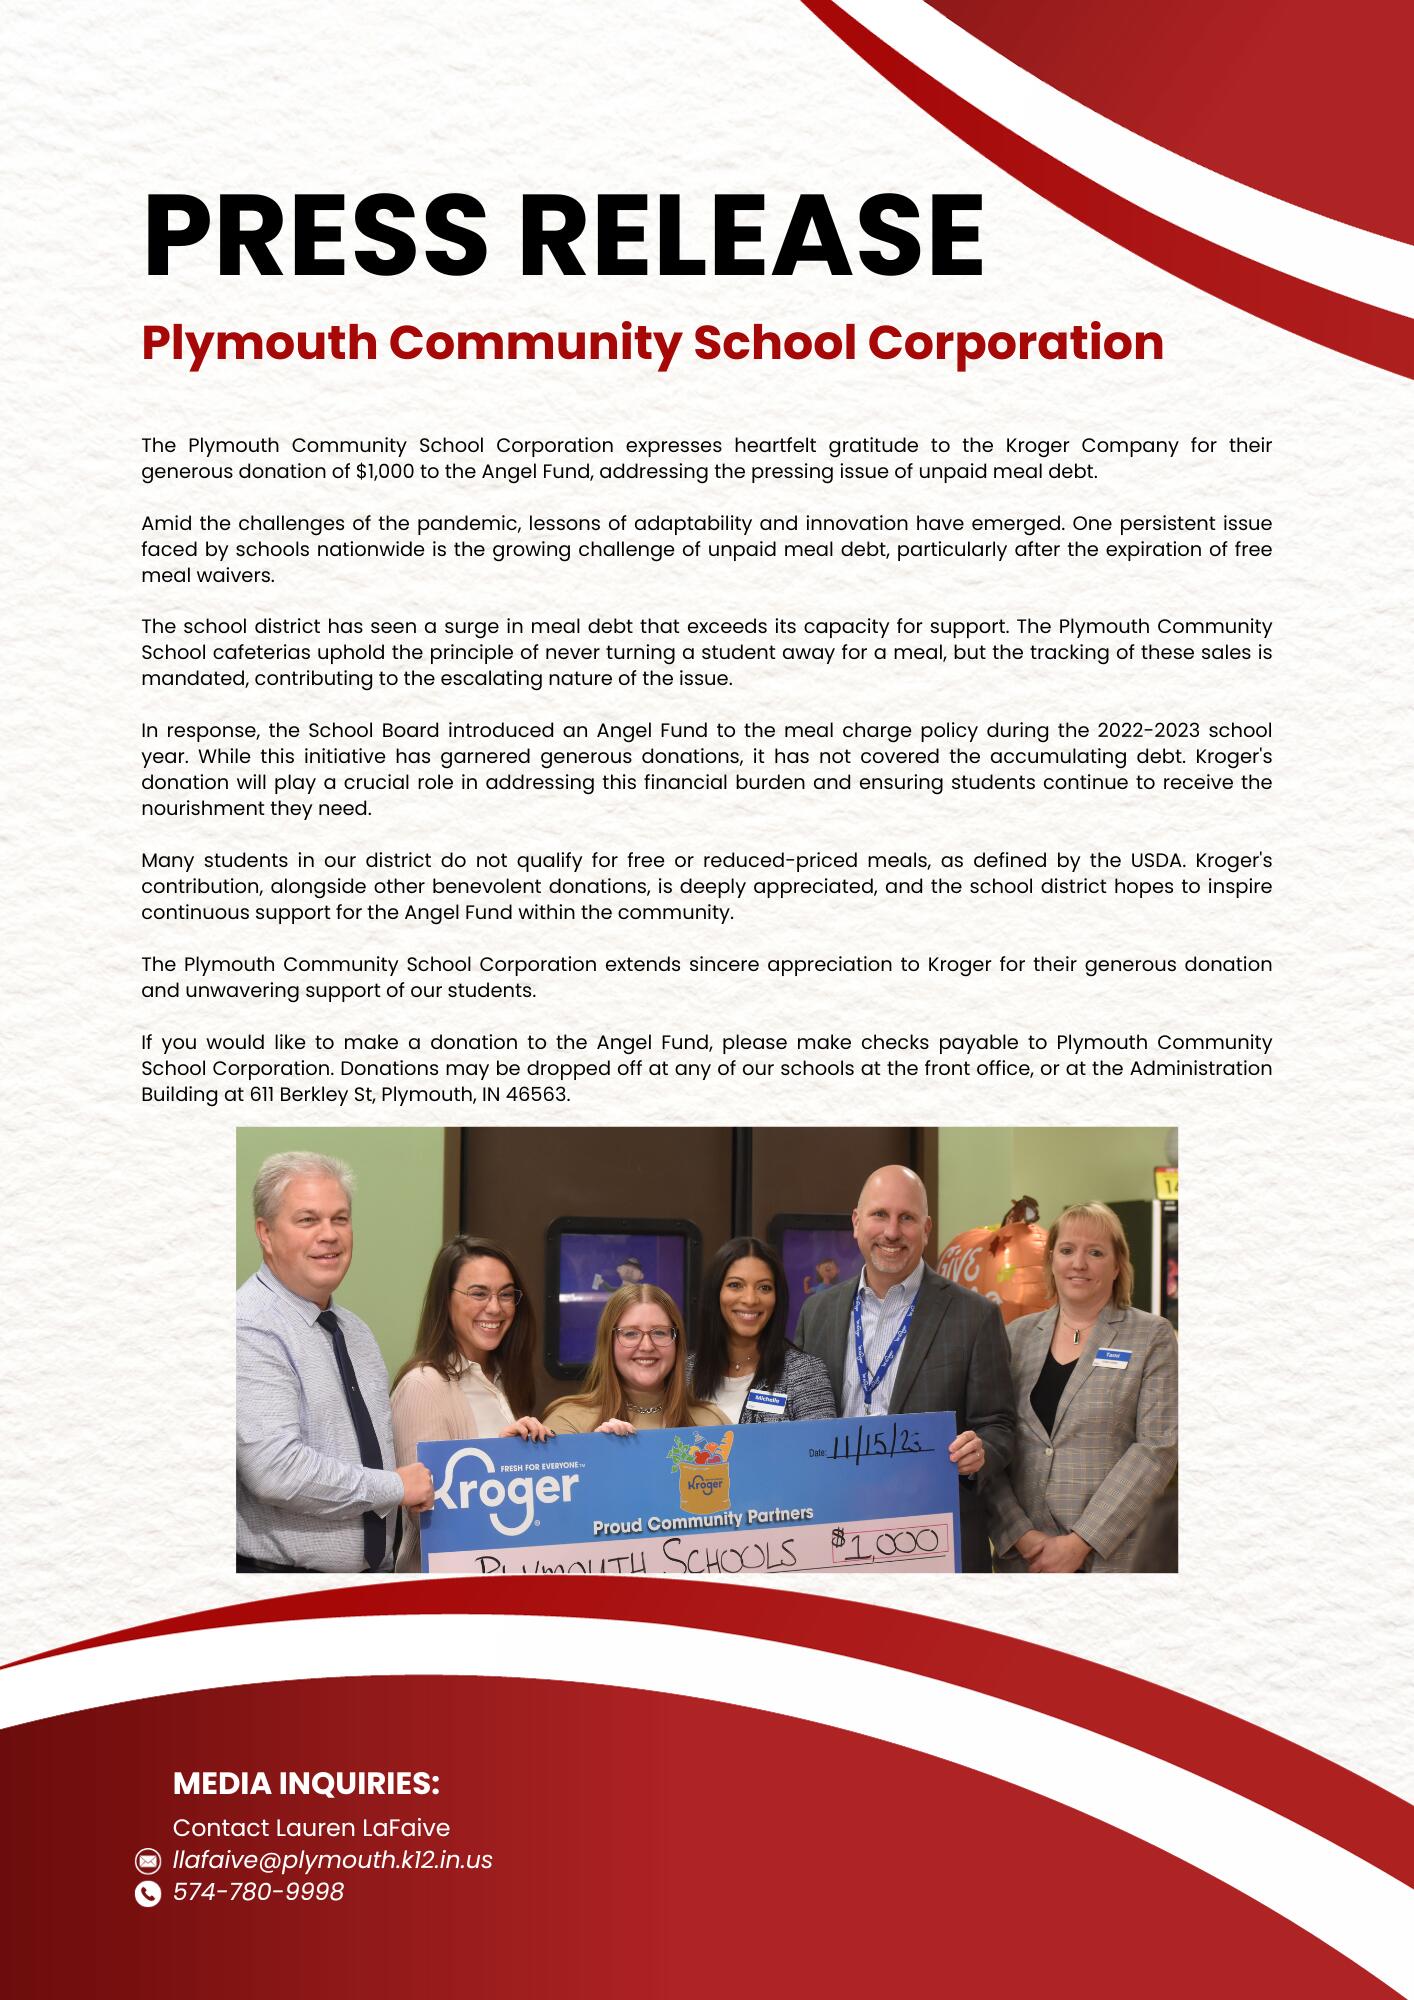 The Plymouth Community School Corporation expresses heartfelt gratitude to the Kroger Company for their generous donation of $1,000 to the Angel Fund, addressing the pressing issue of unpaid meal debt.  Amid the challenges of the pandemic, lessons of adaptability and innovation have emerged. One persistent issue faced by schools nationwide is the growing challenge of unpaid meal debt, particularly after the expiration of free meal waivers.  The school district has seen a surge in meal debt that exceeds its capacity for support. The Plymouth Community School cafeterias uphold the principle of never turning a student away for a meal, but the tracking of these sales is mandated, contributing to the escalating nature of the issue.  In response, the School Board introduced an Angel Fund to the meal charge policy during the 2022-2023 school year. While this initiative has garnered generous donations, it has not covered the accumulating debt. Kroger's donation will play a crucial role in addressing this financial burden and ensuring students continue to receive the nourishment they need.  Many students in our district do not qualify for free or reduced-priced meals, as defined by the USDA. Kroger's contribution, alongside other benevolent donations, is deeply appreciated, and the school district hopes to inspire continuous support for the Angel Fund within the community.  The Plymouth Community School Corporation extends sincere appreciation to Kroger for their generous donation and unwavering support of our students.  If you would like to make a donation to the Angel Fund, please make checks payable to Plymouth Community School Corporation. Donations may be dropped off at any of our schools at the front office, or at the Administration Building at 611 Berkley St, Plymouth, IN 46563.